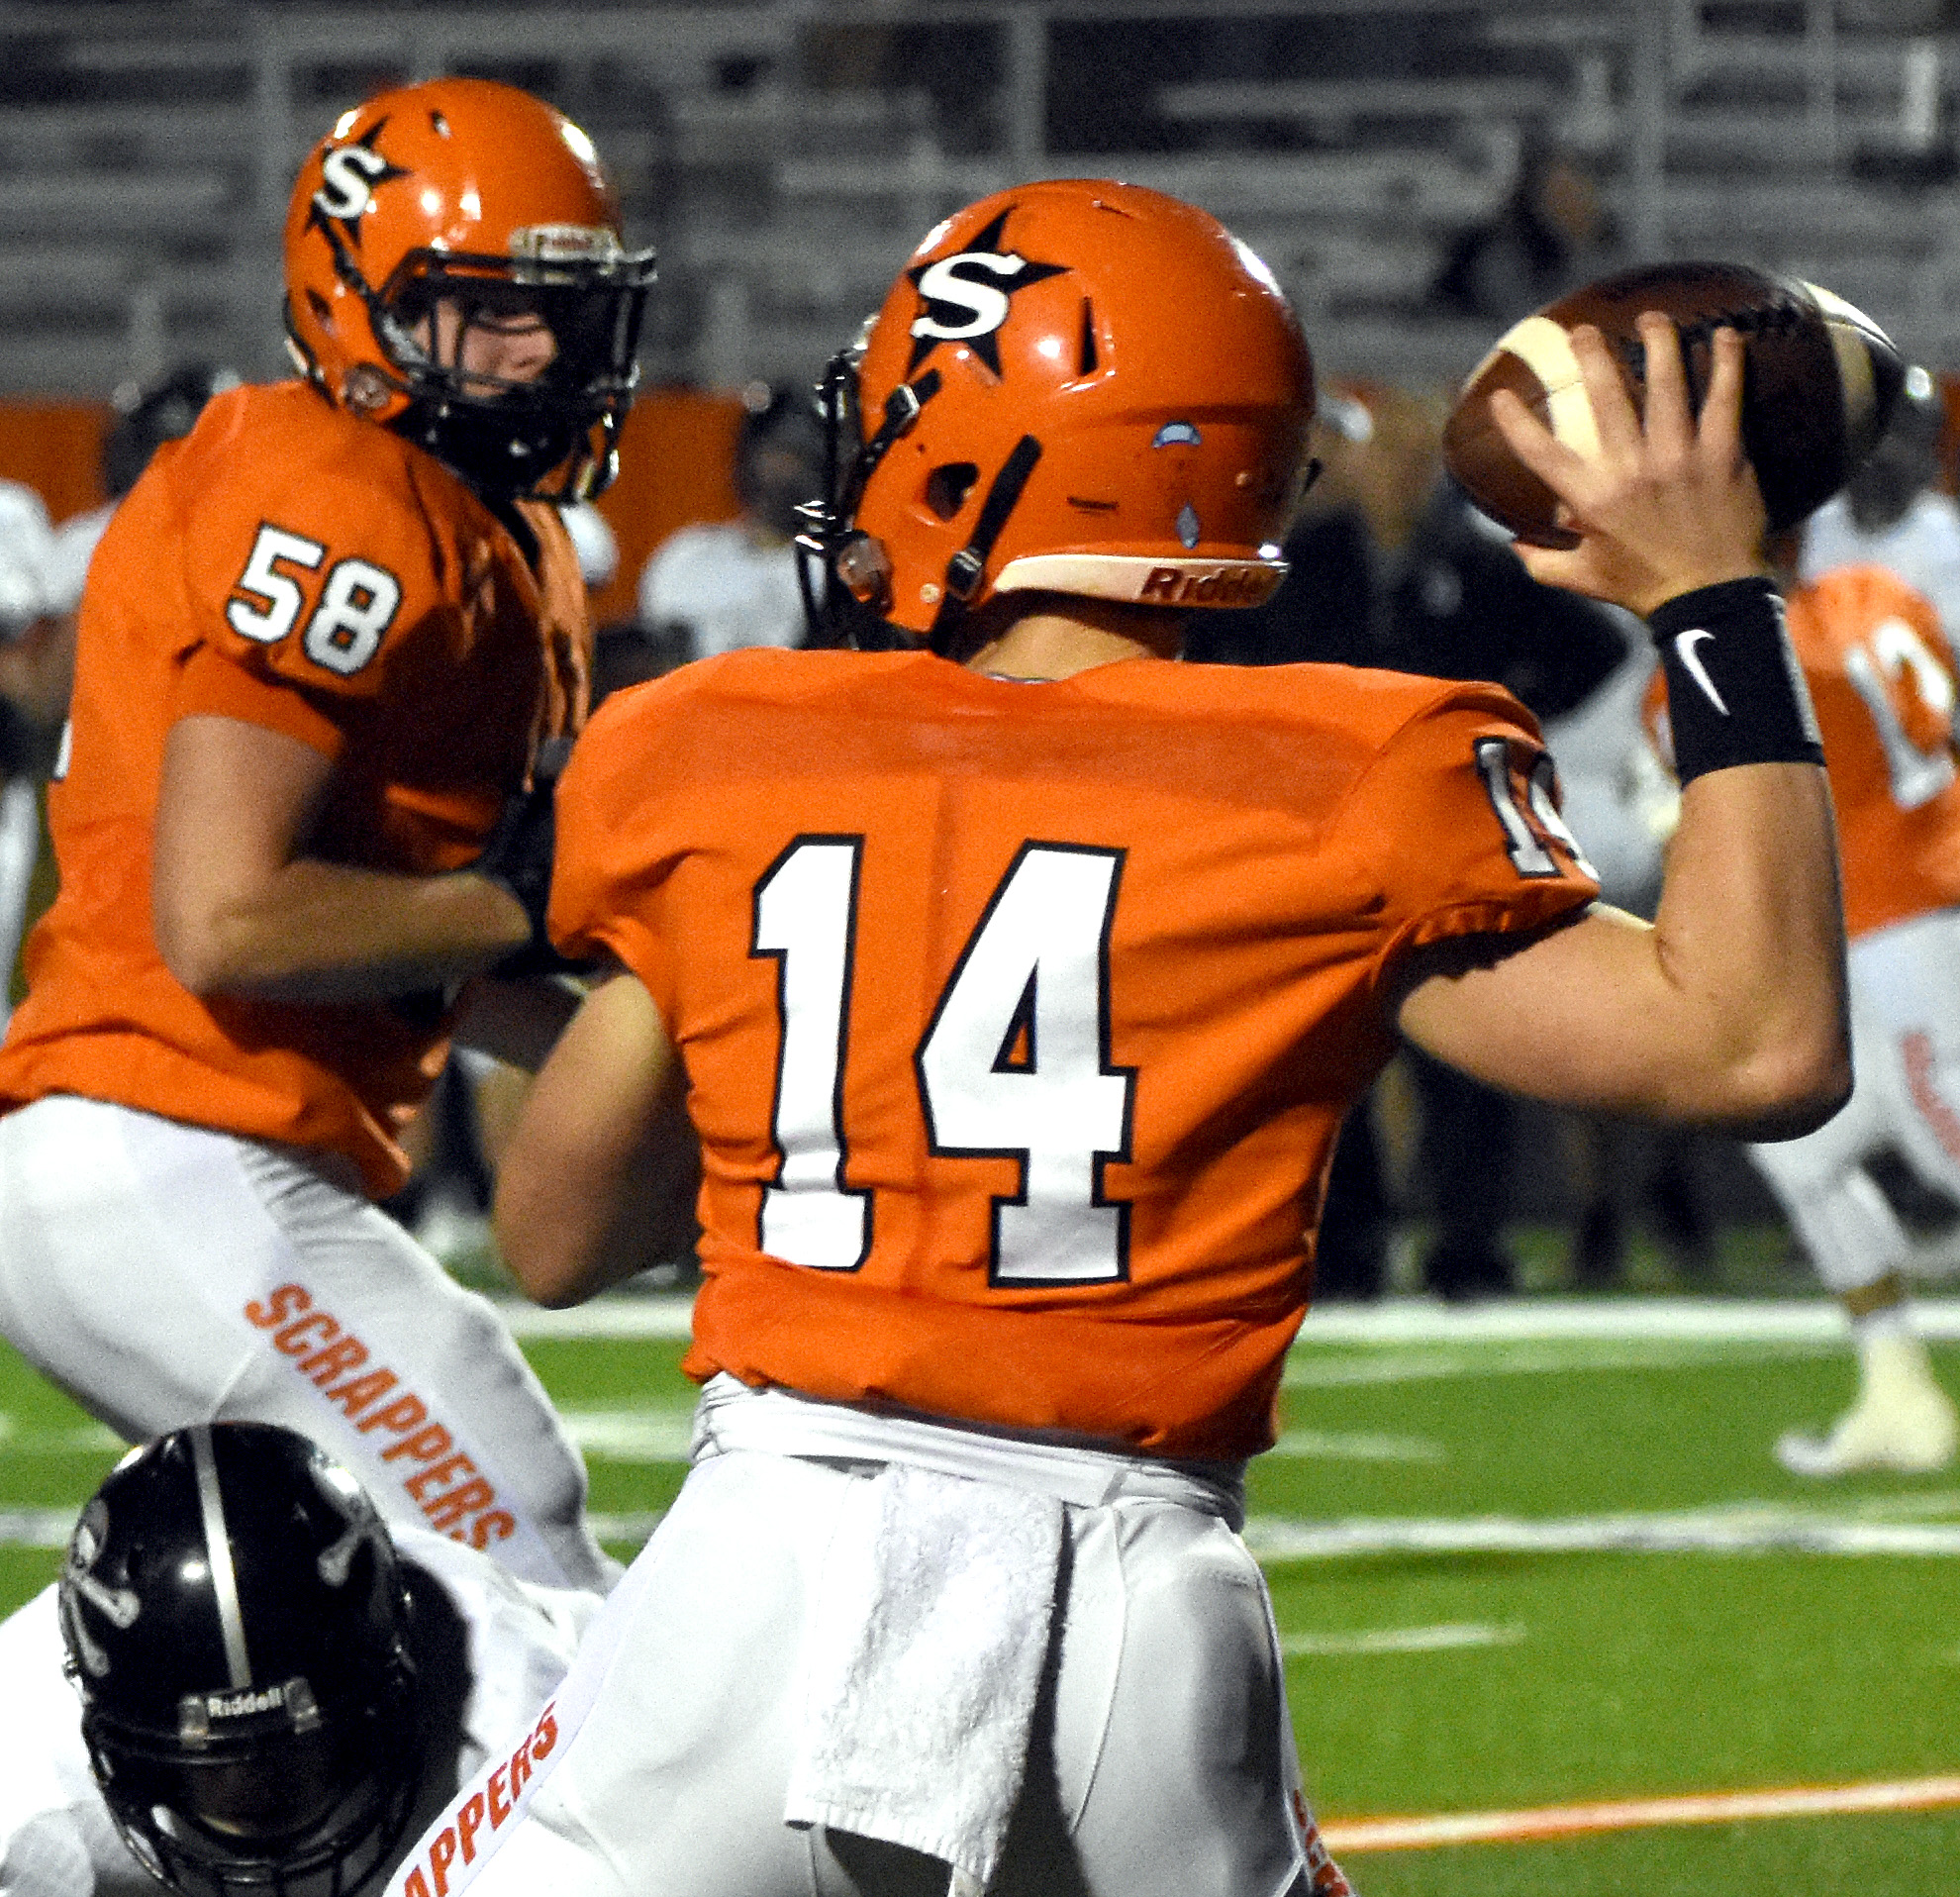 Tyler Hanson (14) gets set to pass as Triston Rhodes keeps Dover away.